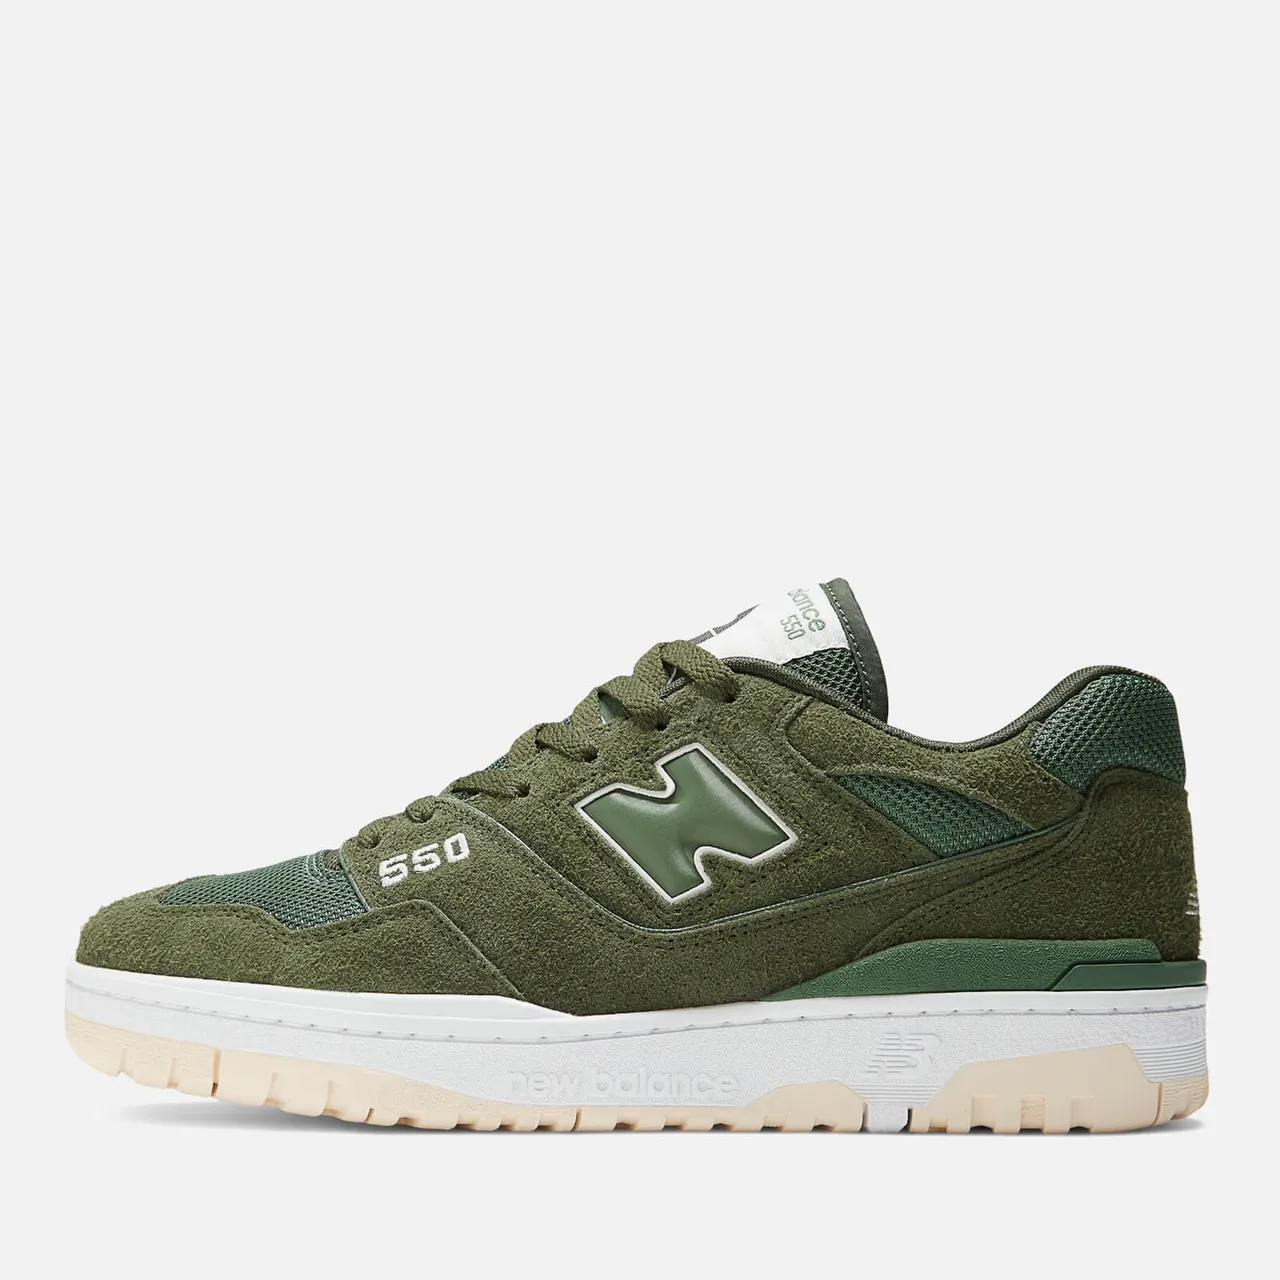 New Balance 550 Suede and Mesh Trainers - UK